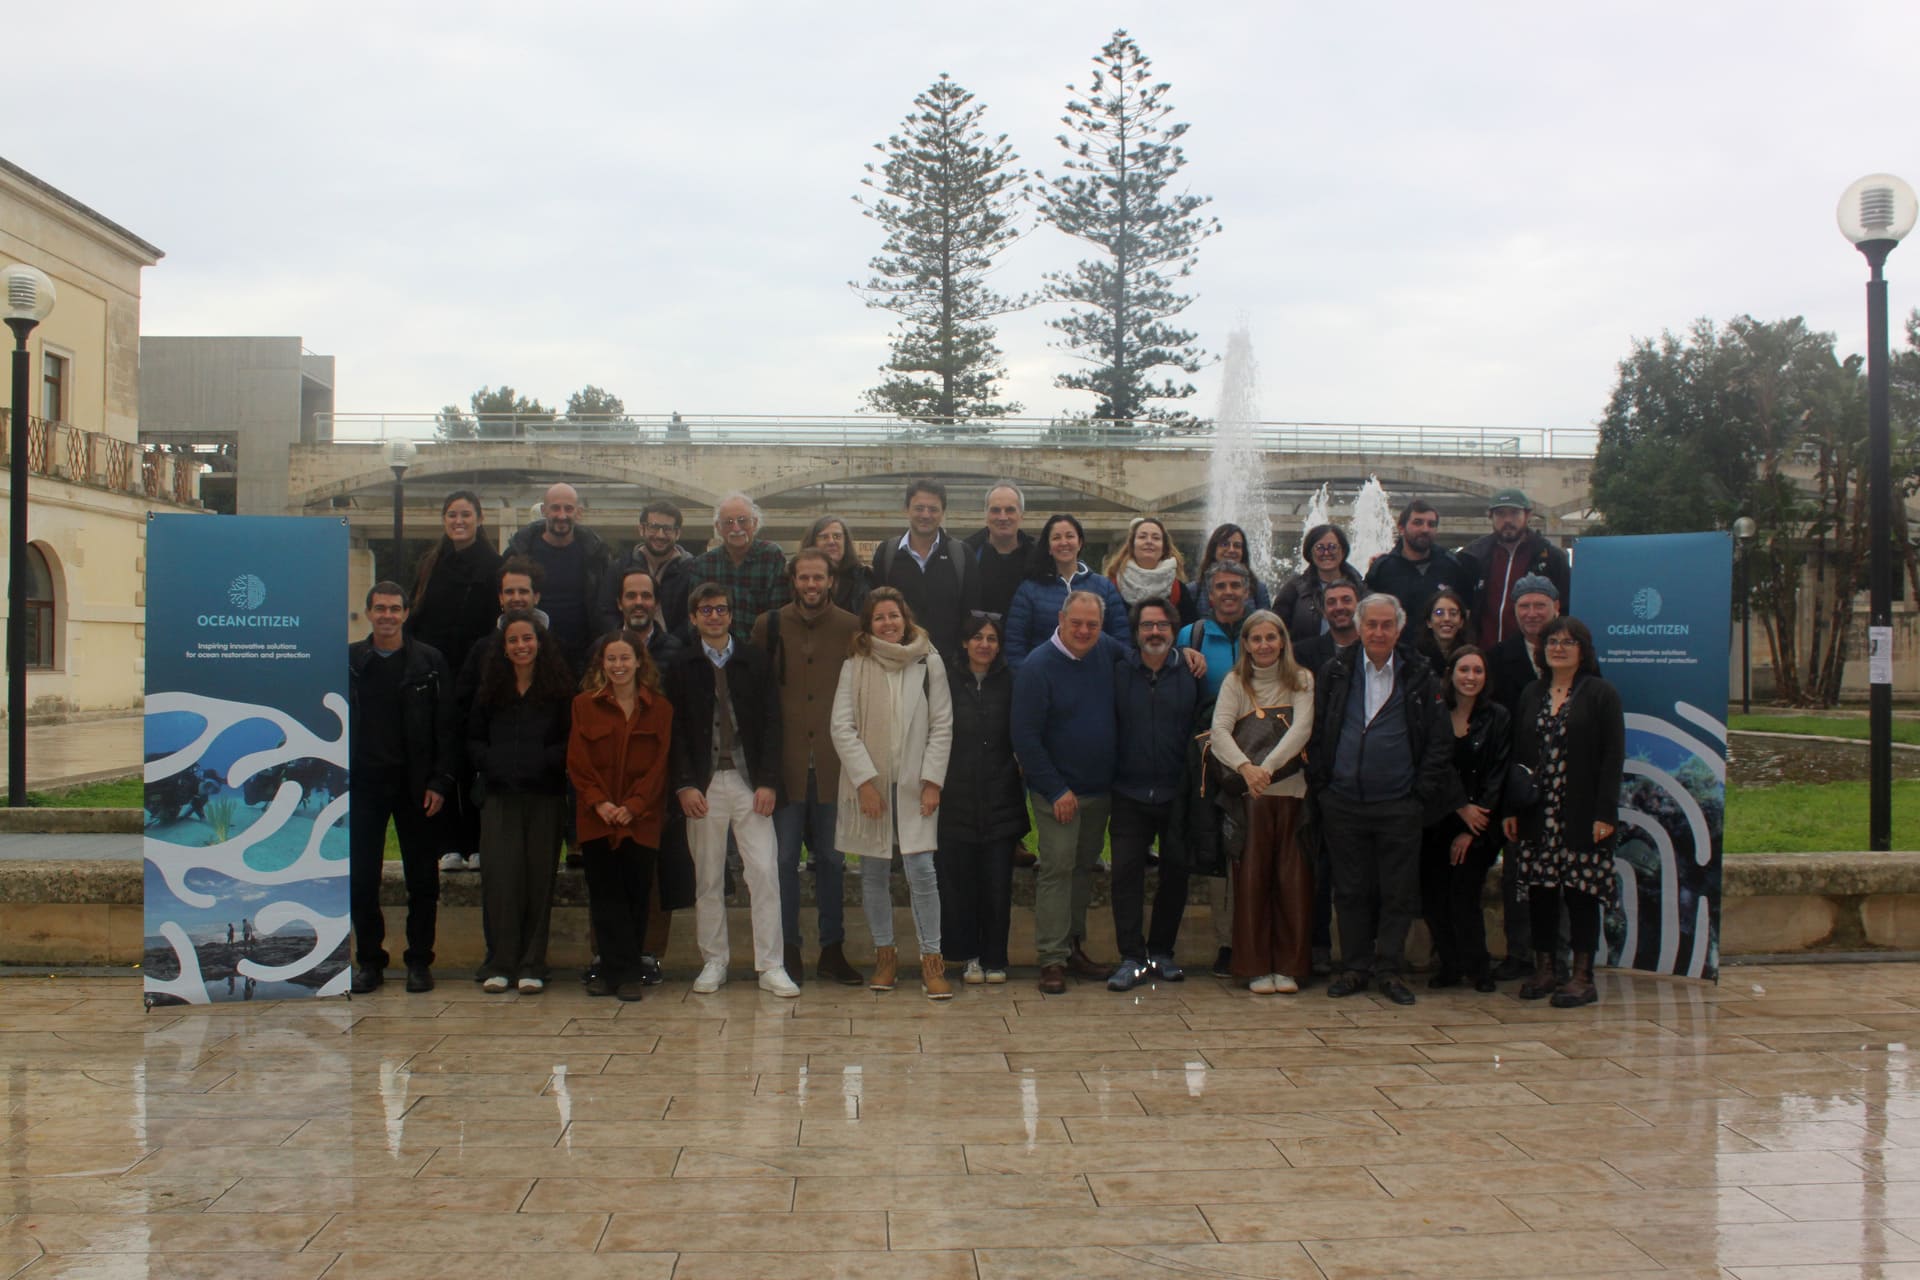 OCEAN CITIZEN’s annual meeting in Lecce brings together partners to discuss project progress